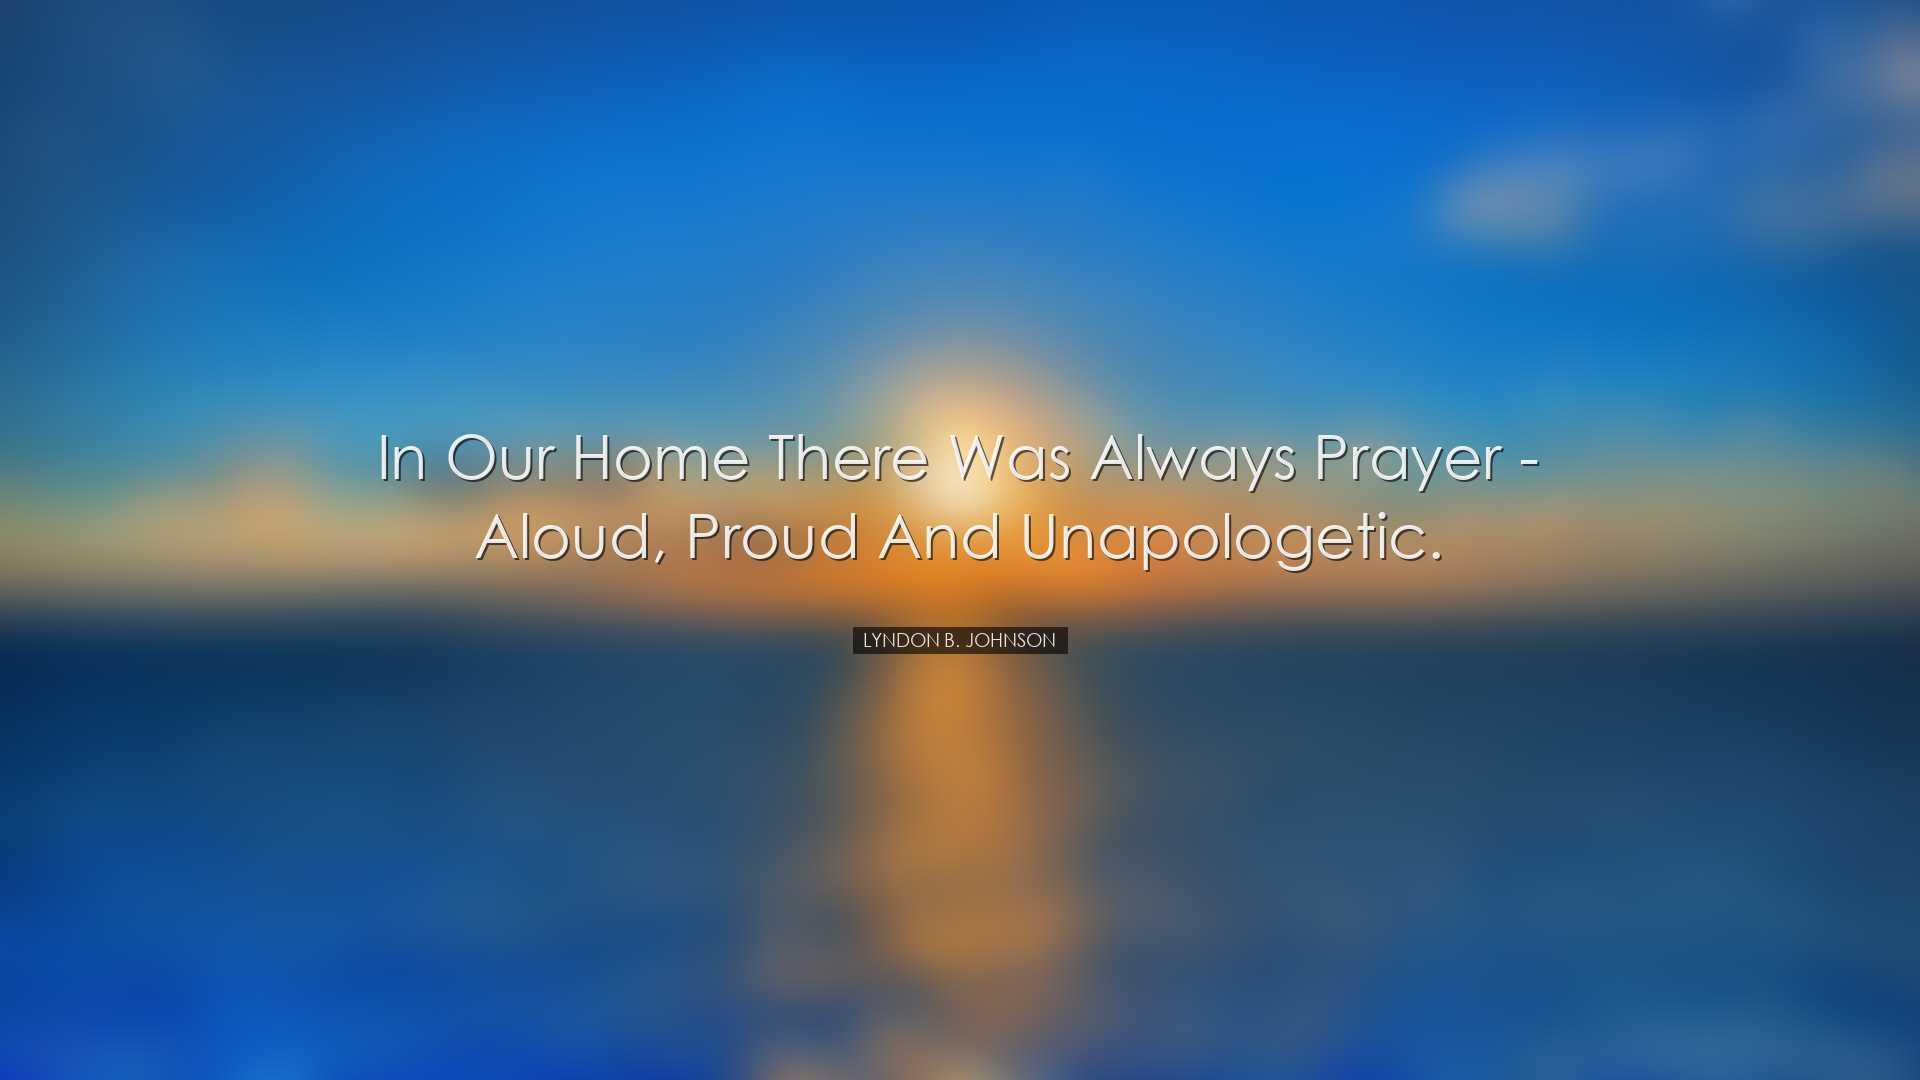 In our home there was always prayer - aloud, proud and unapologeti